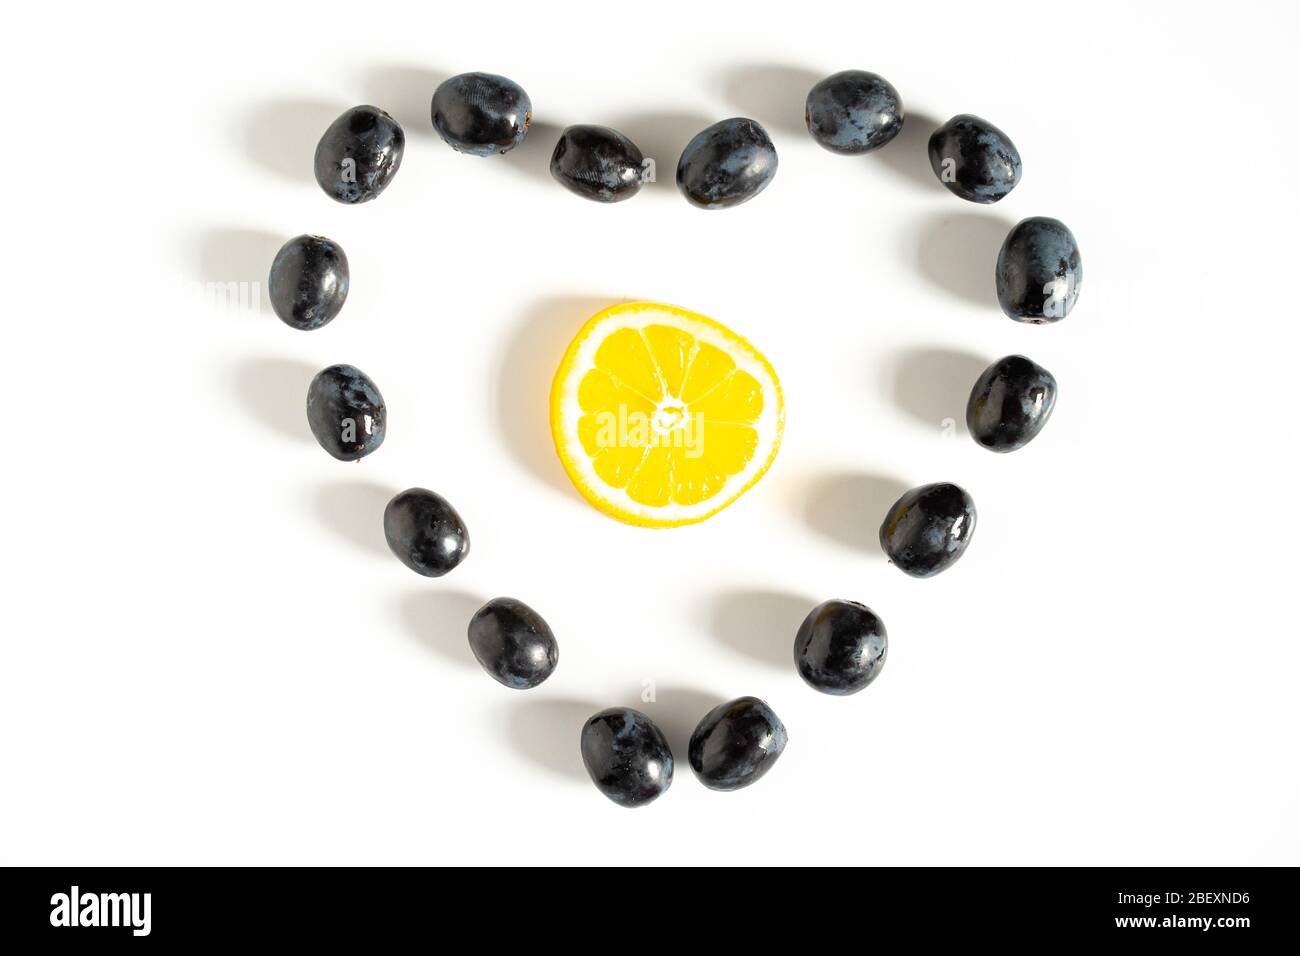 Black grapes laid out in the shape of a love heart with a lemon slice in the center against a plain white background Stock Photo